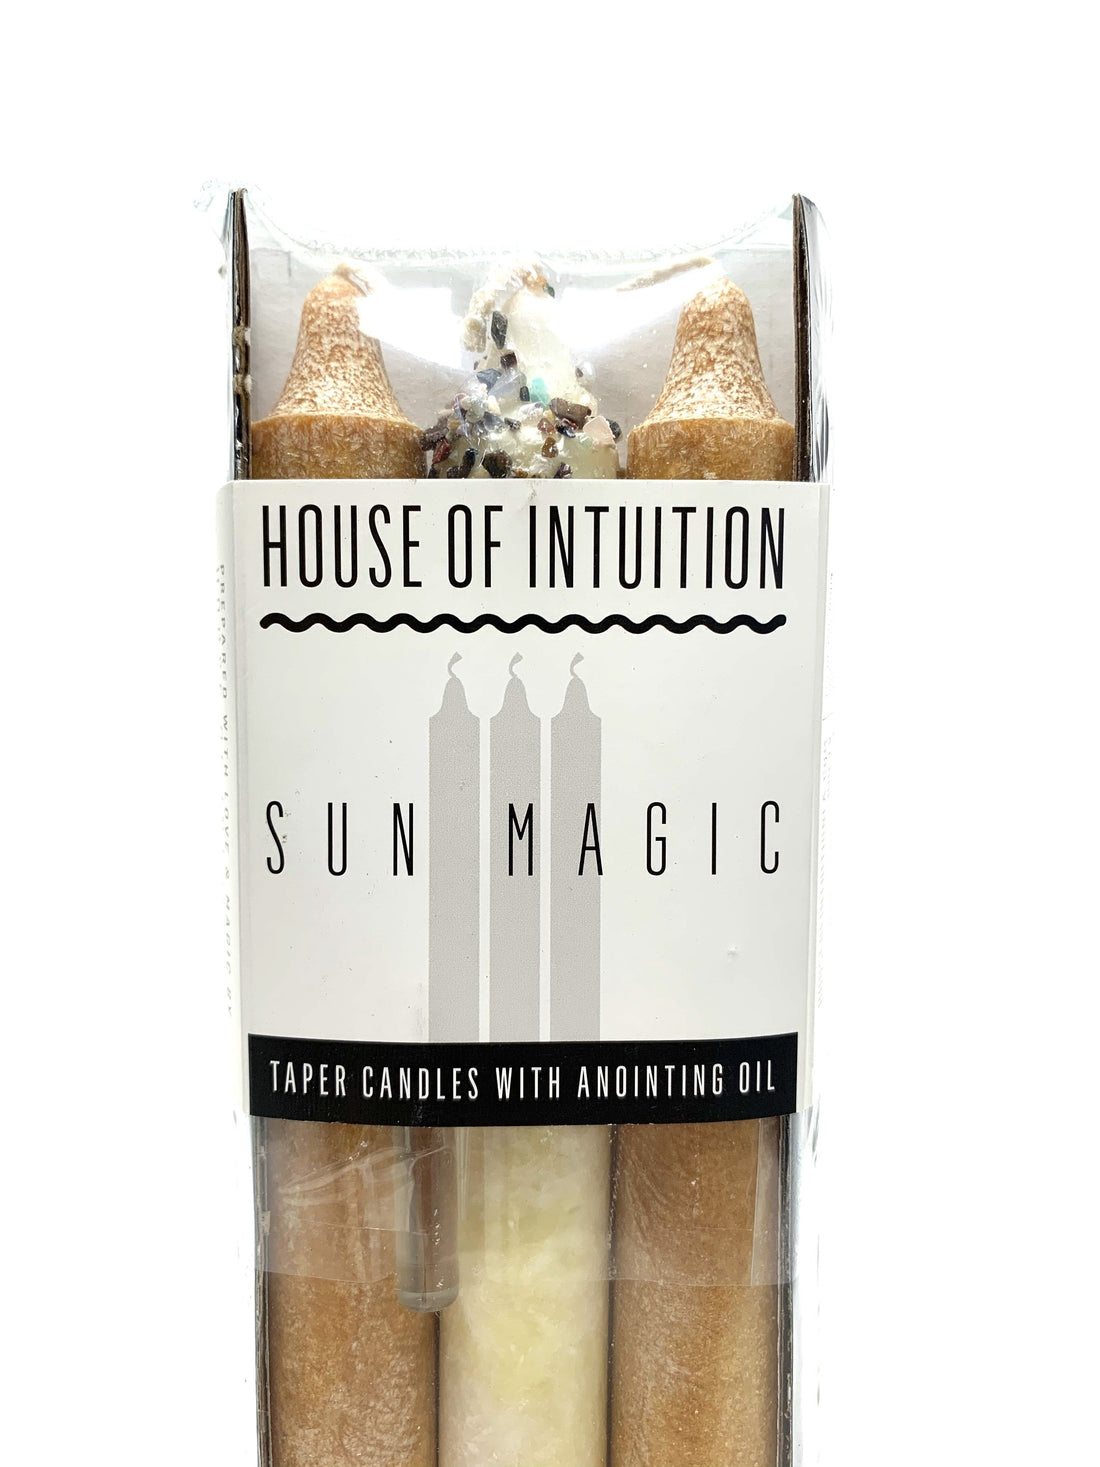 Taper Intention Candle Set - Sun Magic Taper Intention Candles House of Intuition 